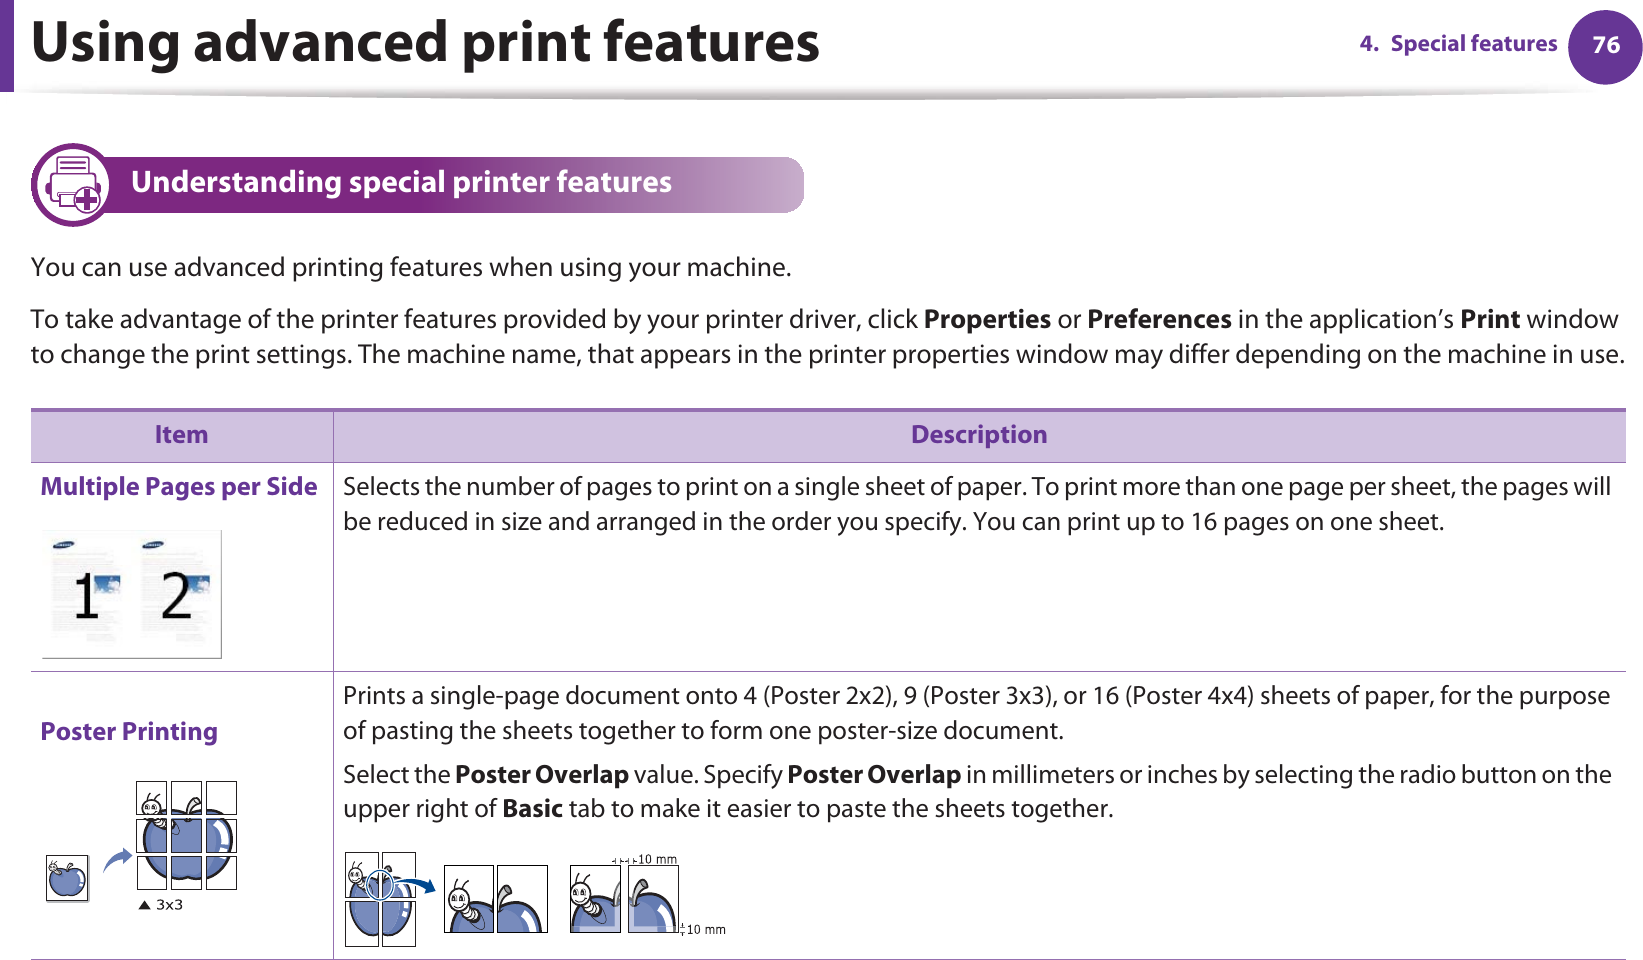 Using advanced print features 764. Special features2 Understanding special printer featuresYou can use advanced printing features when using your machine.To take advantage of the printer features provided by your printer driver, click Properties or Preferences in the application’s Print window to change the print settings. The machine name, that appears in the printer properties window may differ depending on the machine in use. Item DescriptionMultiple Pages per Side Selects the number of pages to print on a single sheet of paper. To print more than one page per sheet, the pages will be reduced in size and arranged in the order you specify. You can print up to 16 pages on one sheet. Poster PrintingPrints a single-page document onto 4 (Poster 2x2), 9 (Poster 3x3), or 16 (Poster 4x4) sheets of paper, for the purpose of pasting the sheets together to form one poster-size document.Select the Poster Overlap value. Specify Poster Overlap in millimeters or inches by selecting the radio button on the upper right of Basic tab to make it easier to paste the sheets together.